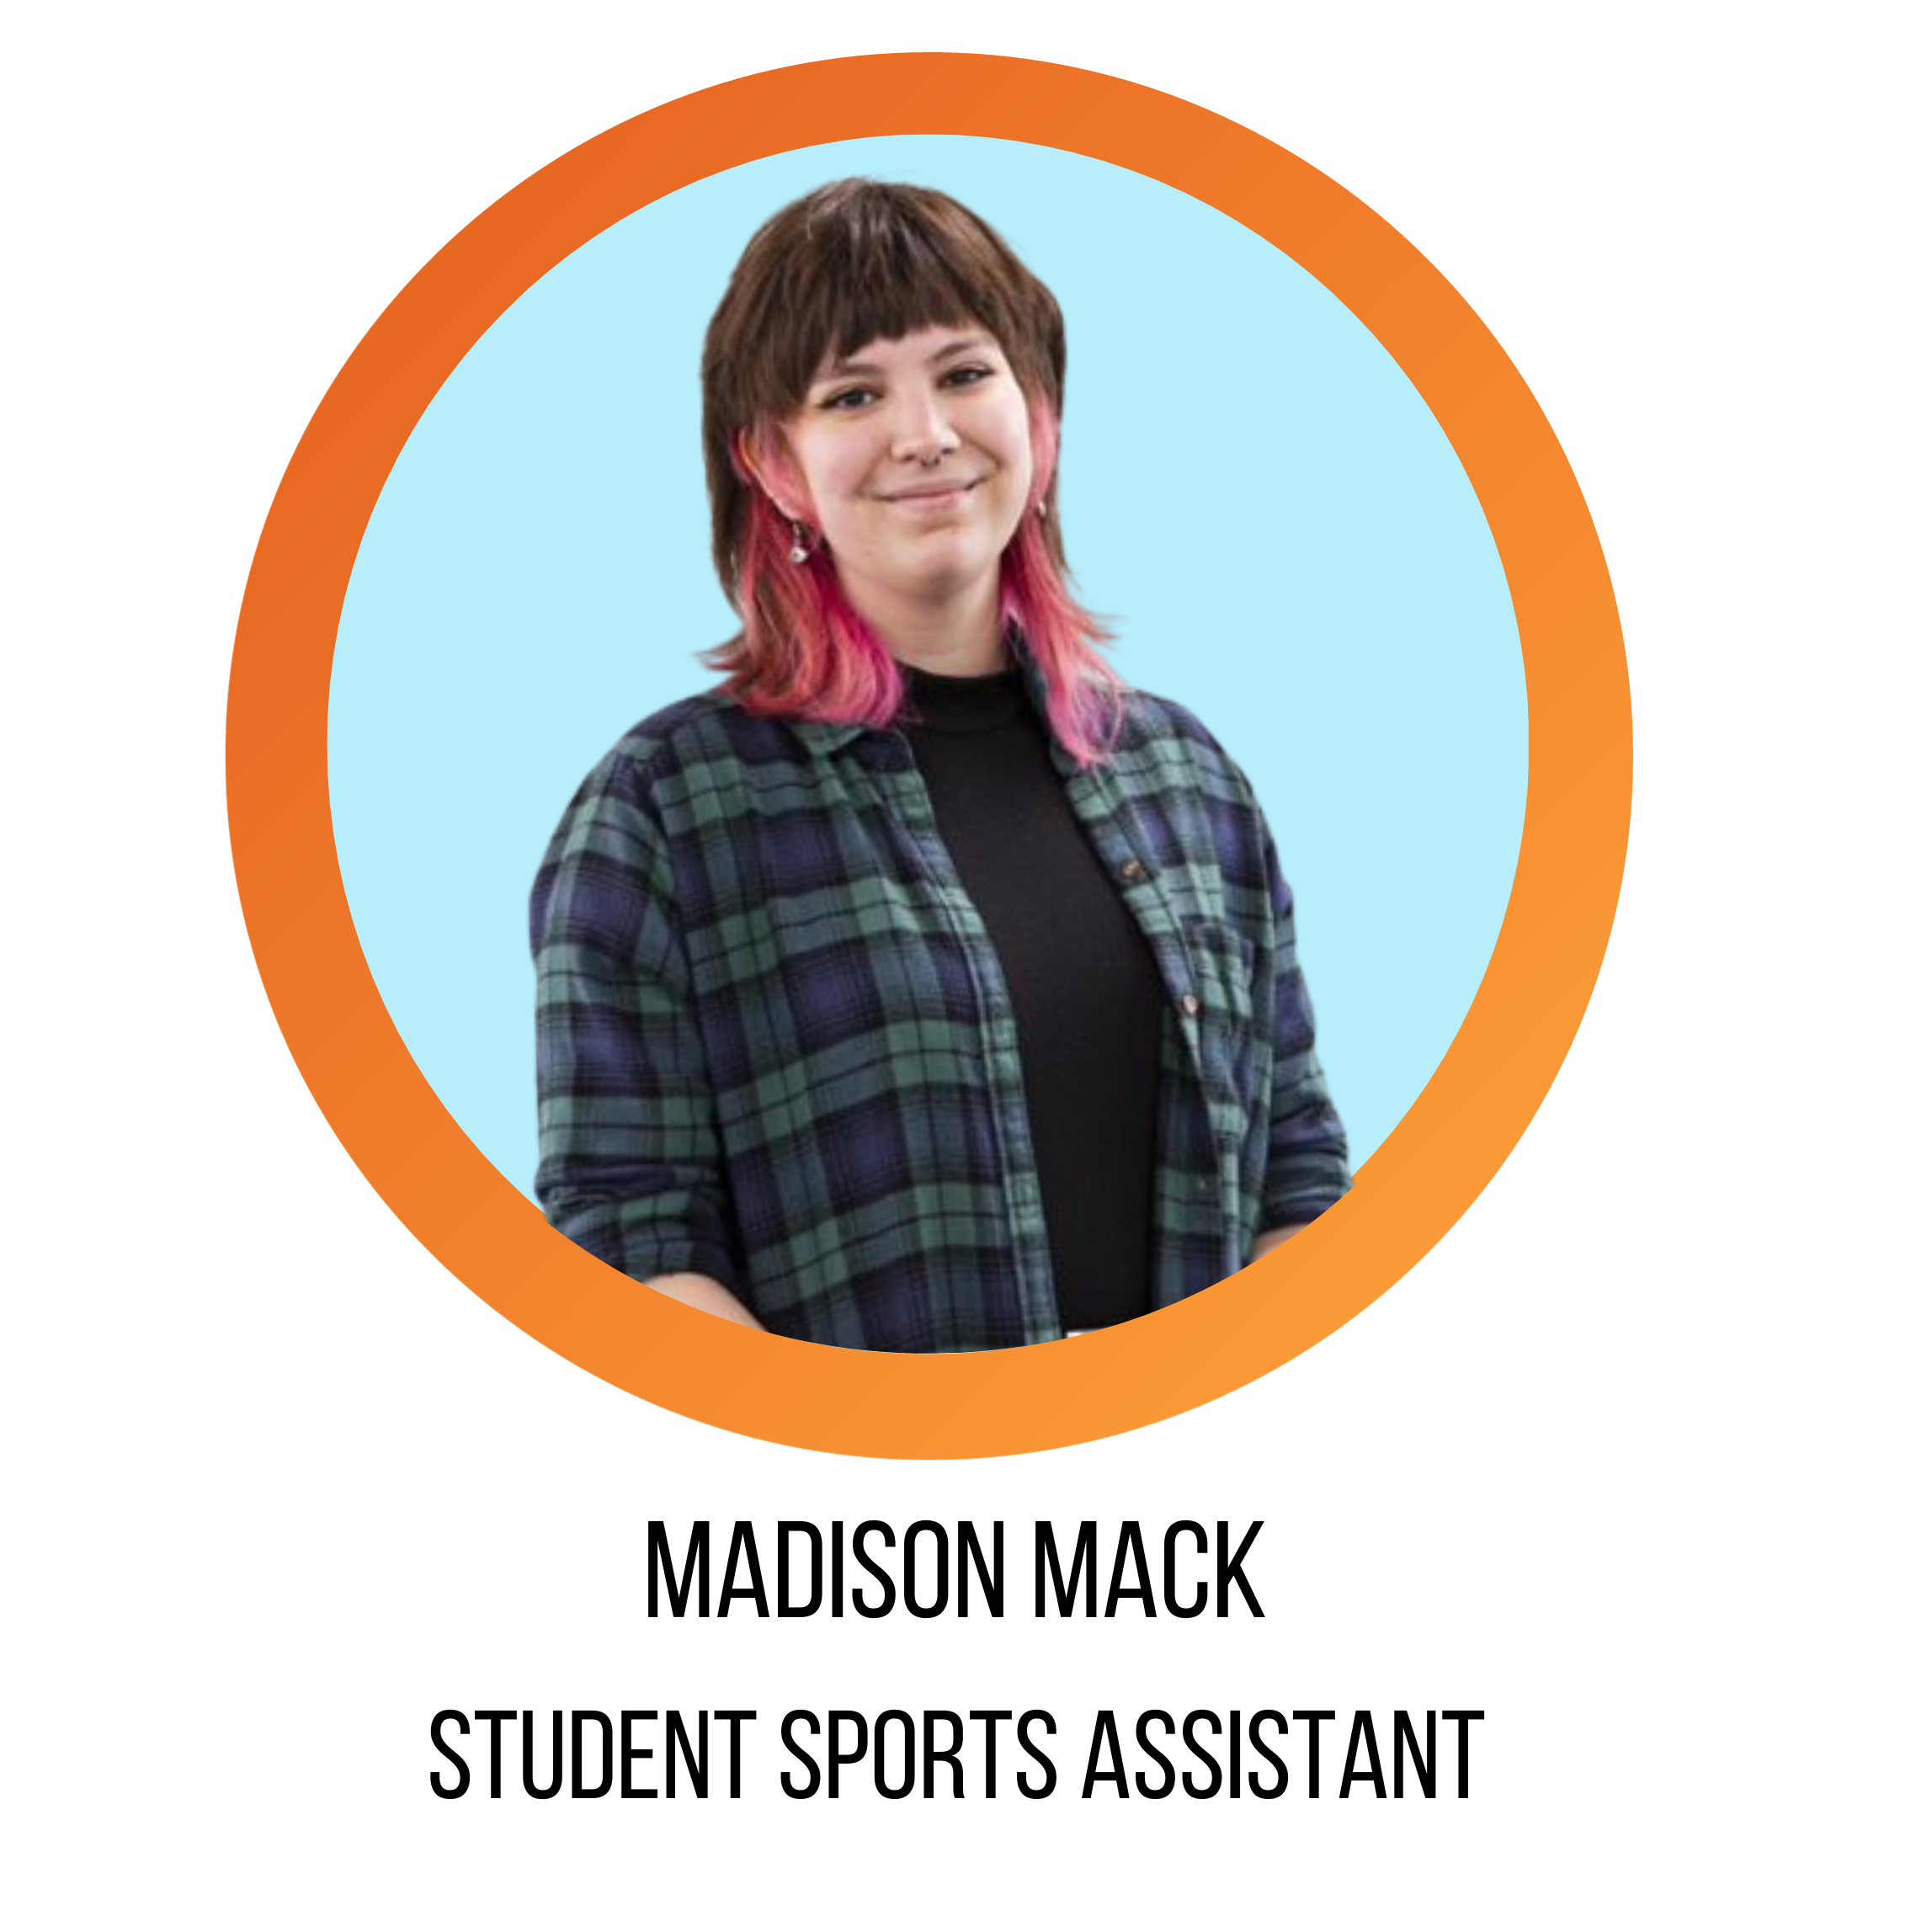 madison mack, student sports assistant, smiling in front of a blue background